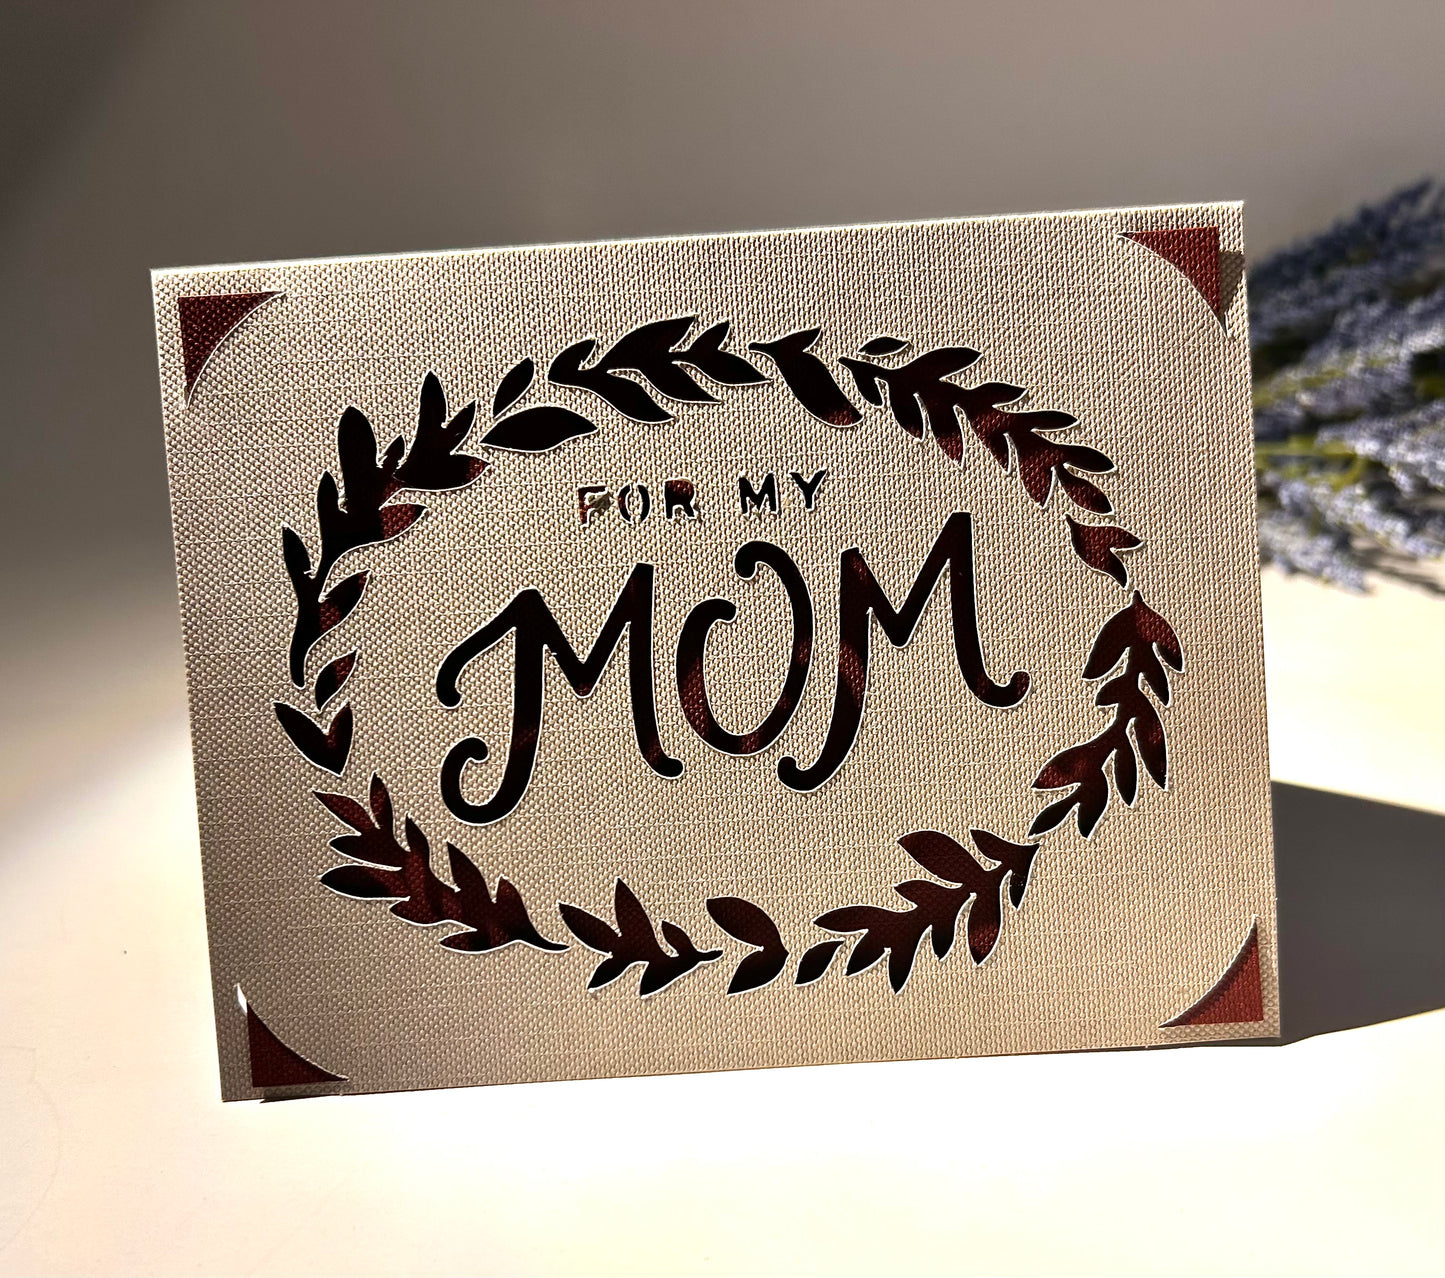 Custom cards for any occasion